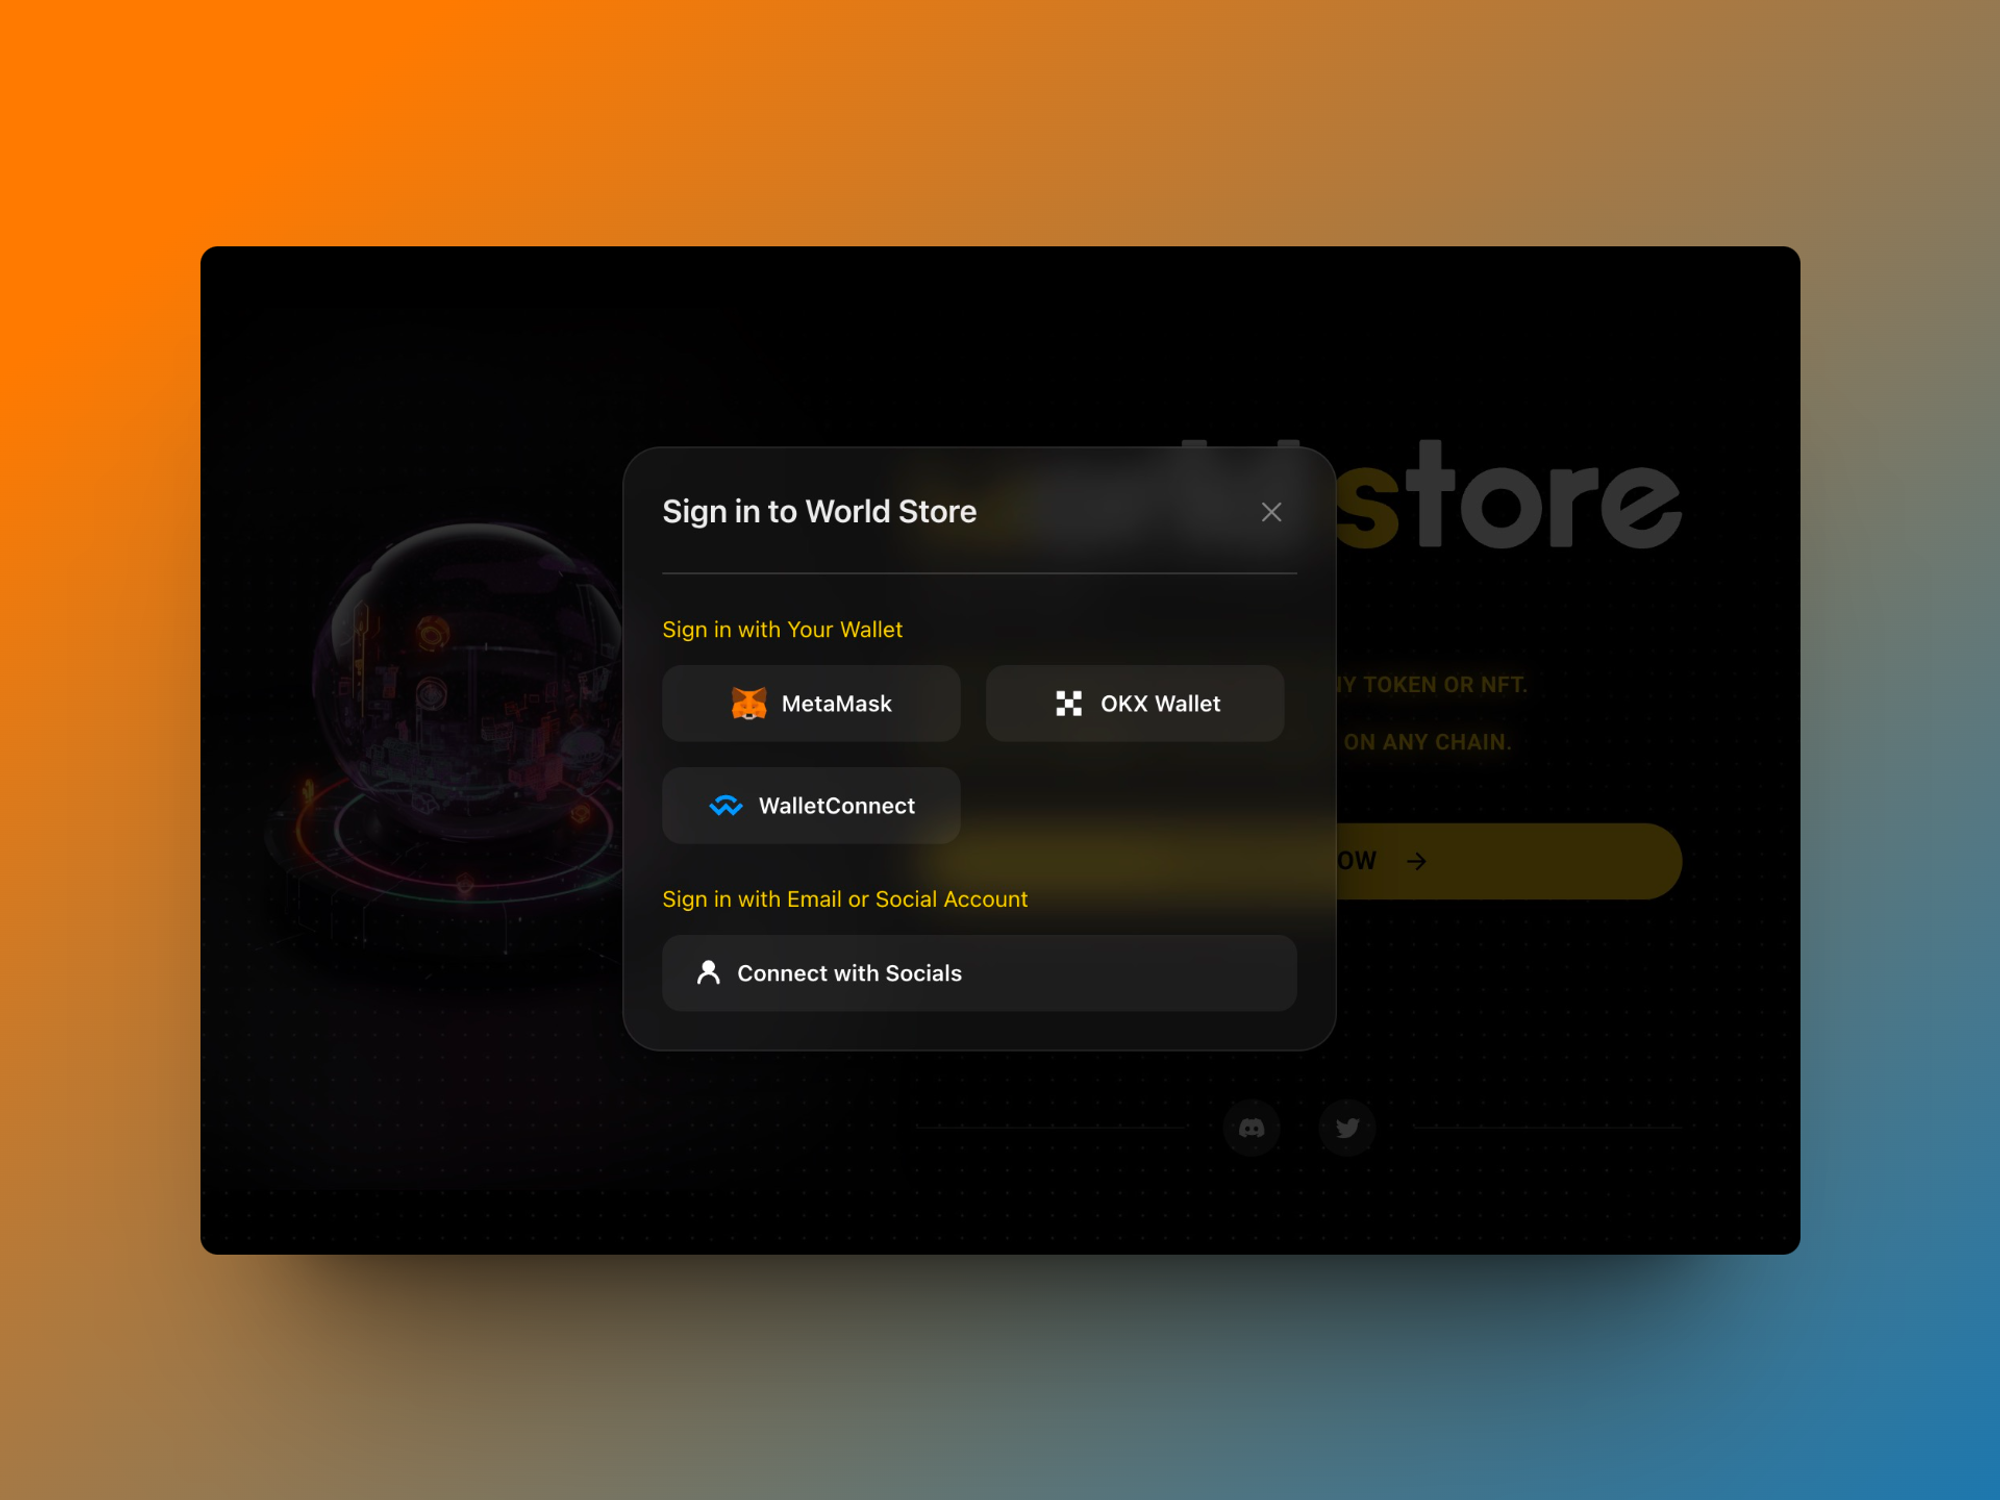 World Store Introduces Social Login Feature: A Seamless Bridge for New Users